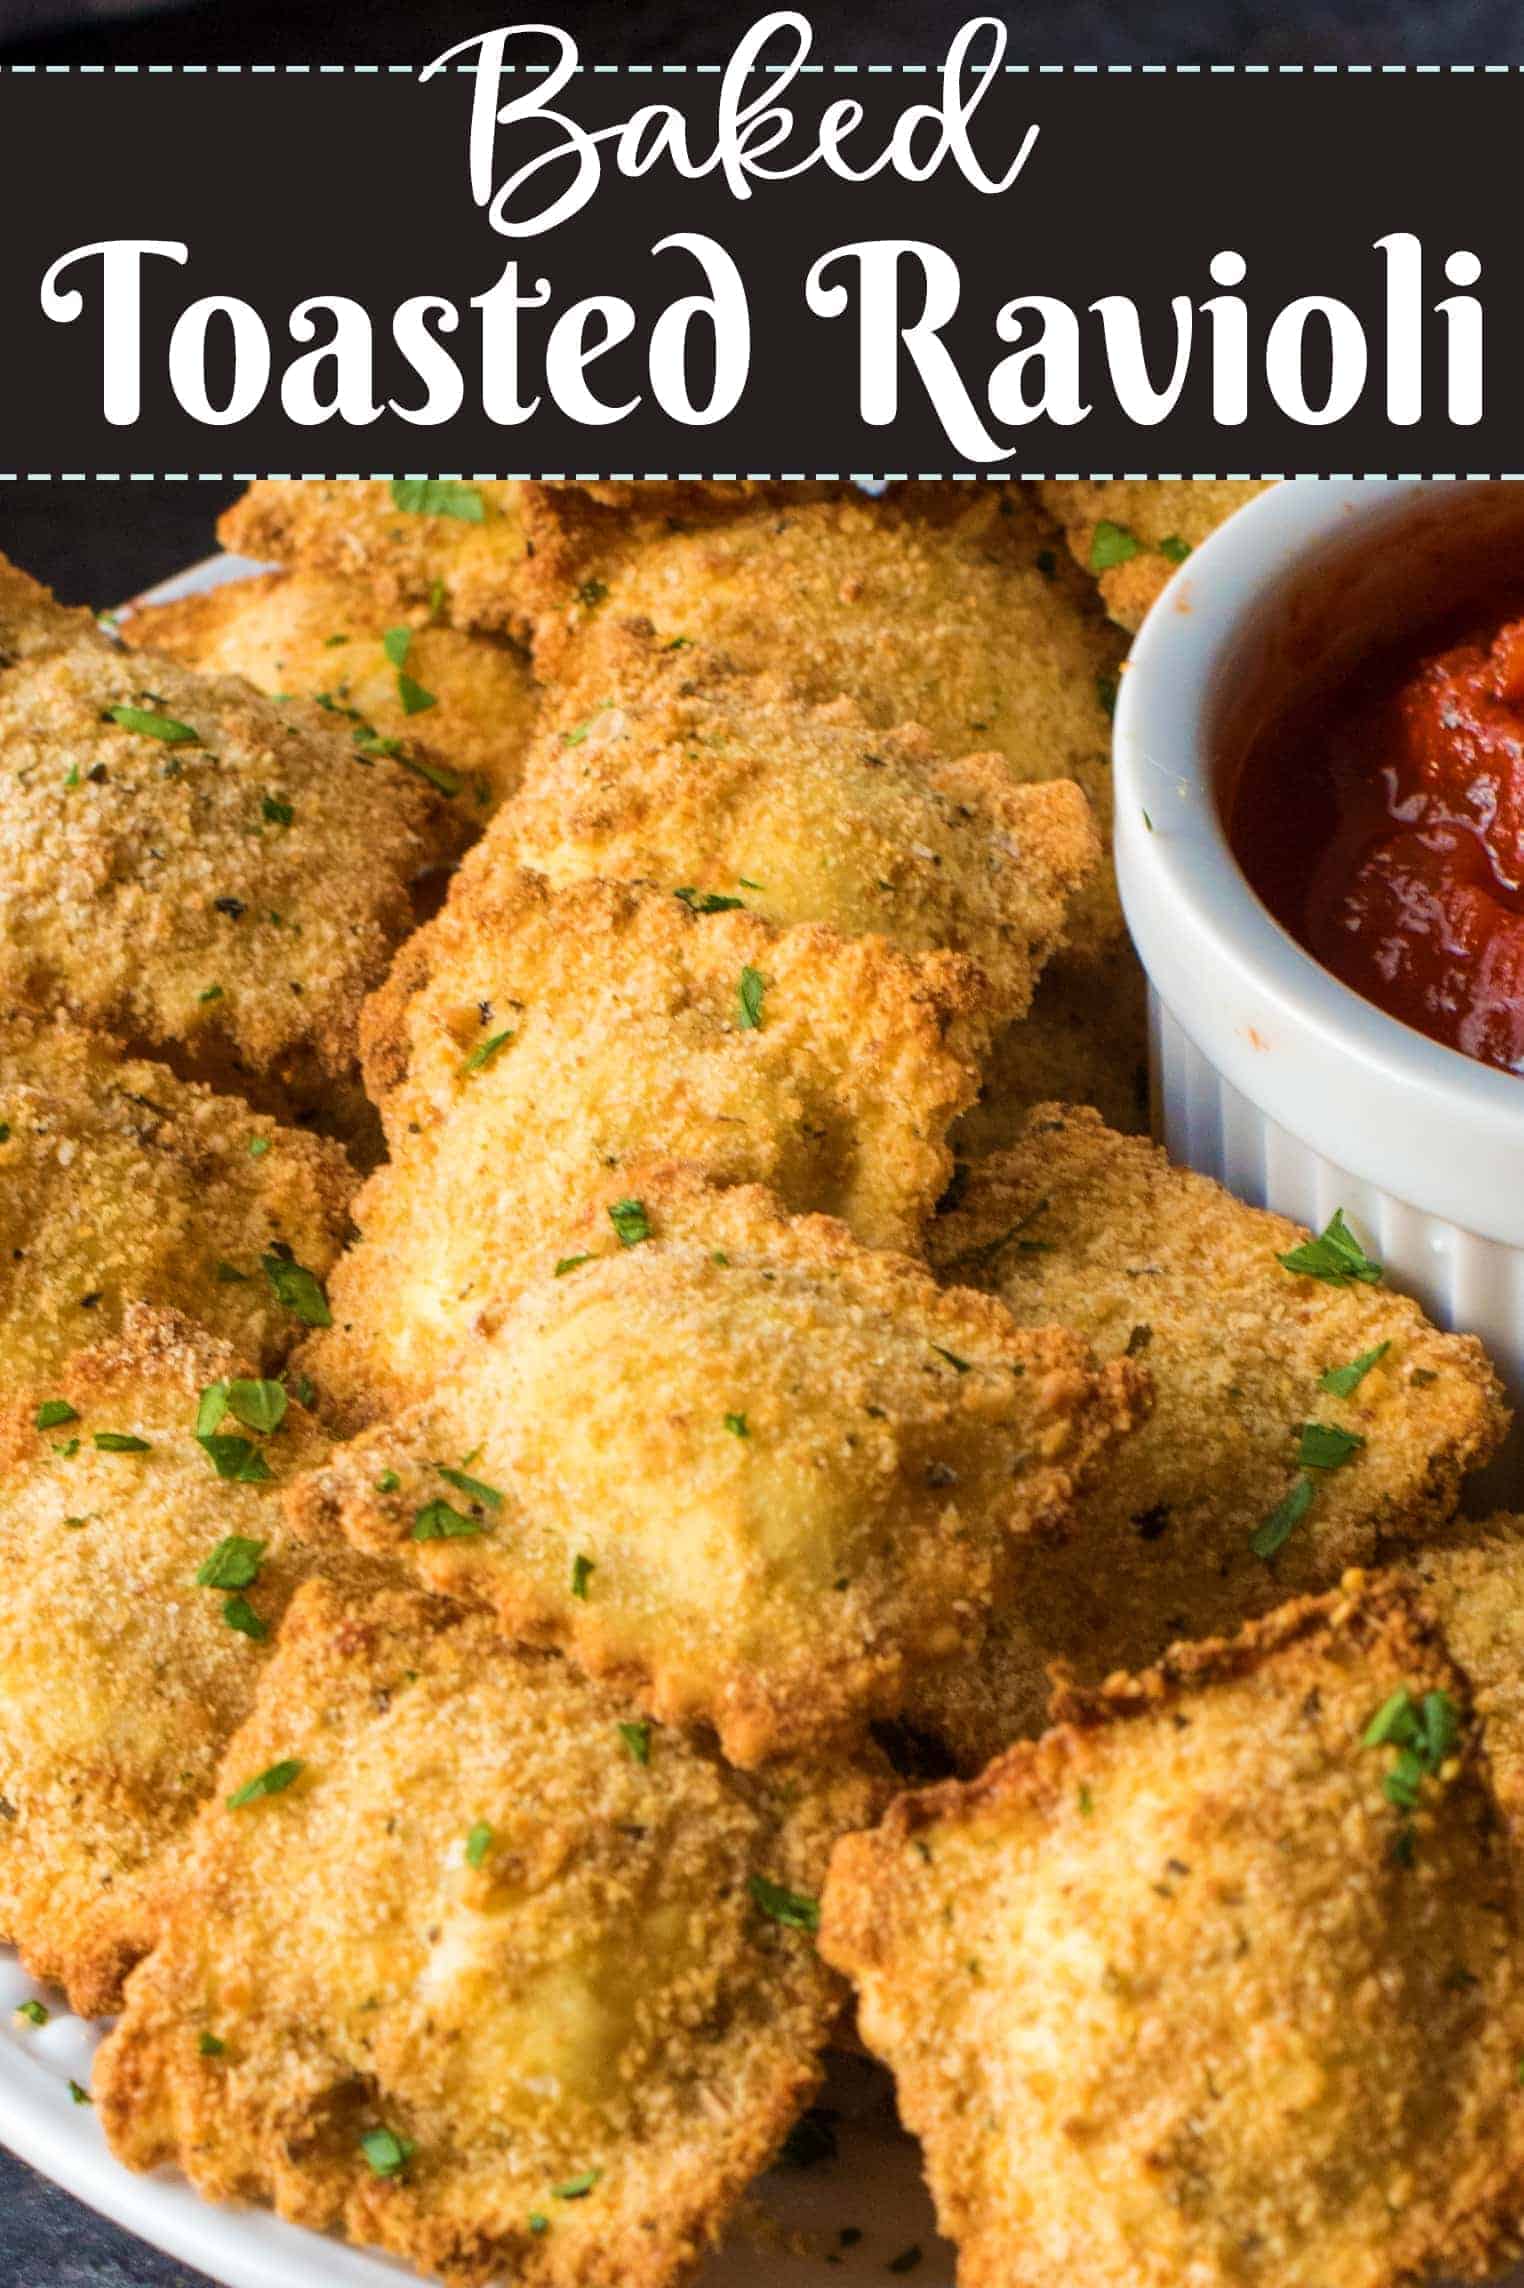 Toasted Ravioli piled on a plate with marinara in white cruet on the side.